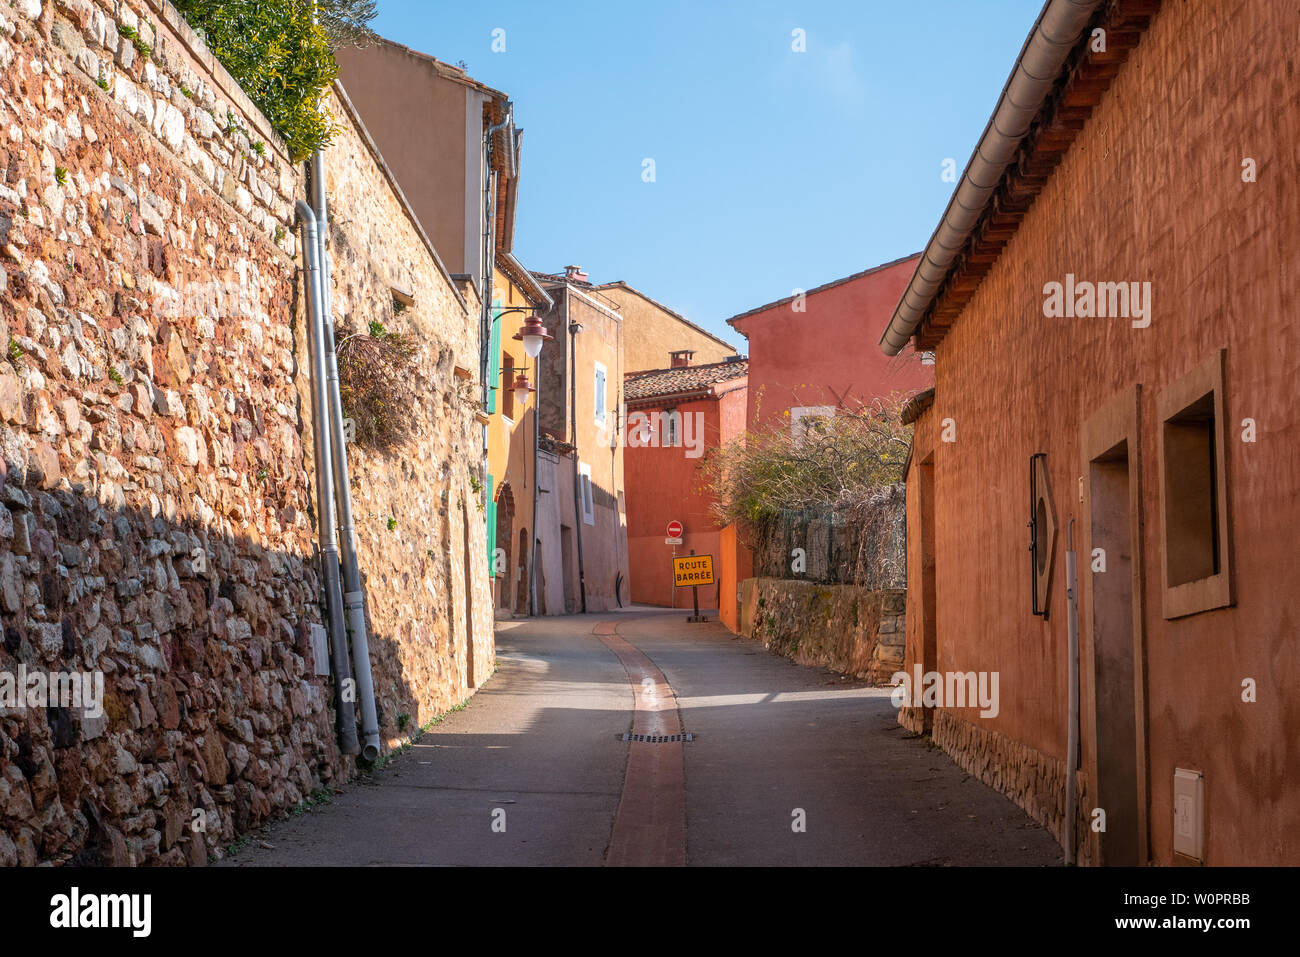 Roussillon, France - January 22, 2019: Houses and buildings facade with the ochre color with clean blue sky as background Stock Photo